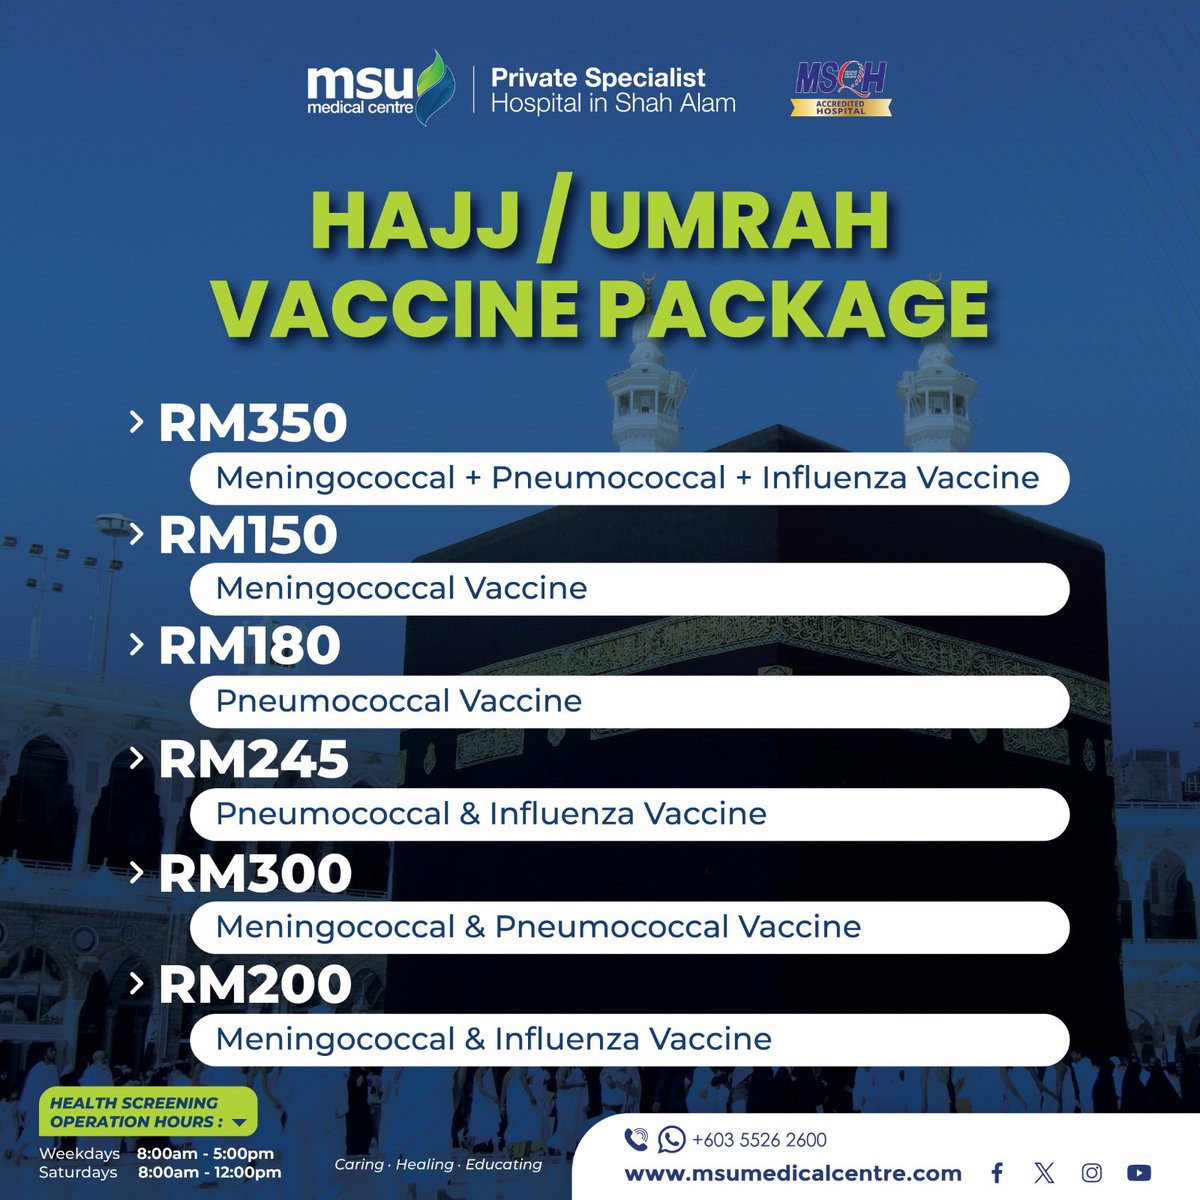 Travel safely and worry-free prior to completing your Umrah or Hajj. MSU Medical Centre now offers vaccinations for the Hajj and Umrah. Visit msumedicalcentre.com or give us a call at 03-55262600 for additional information. #CaringHealingEducating #MSUMC #hajjumrah